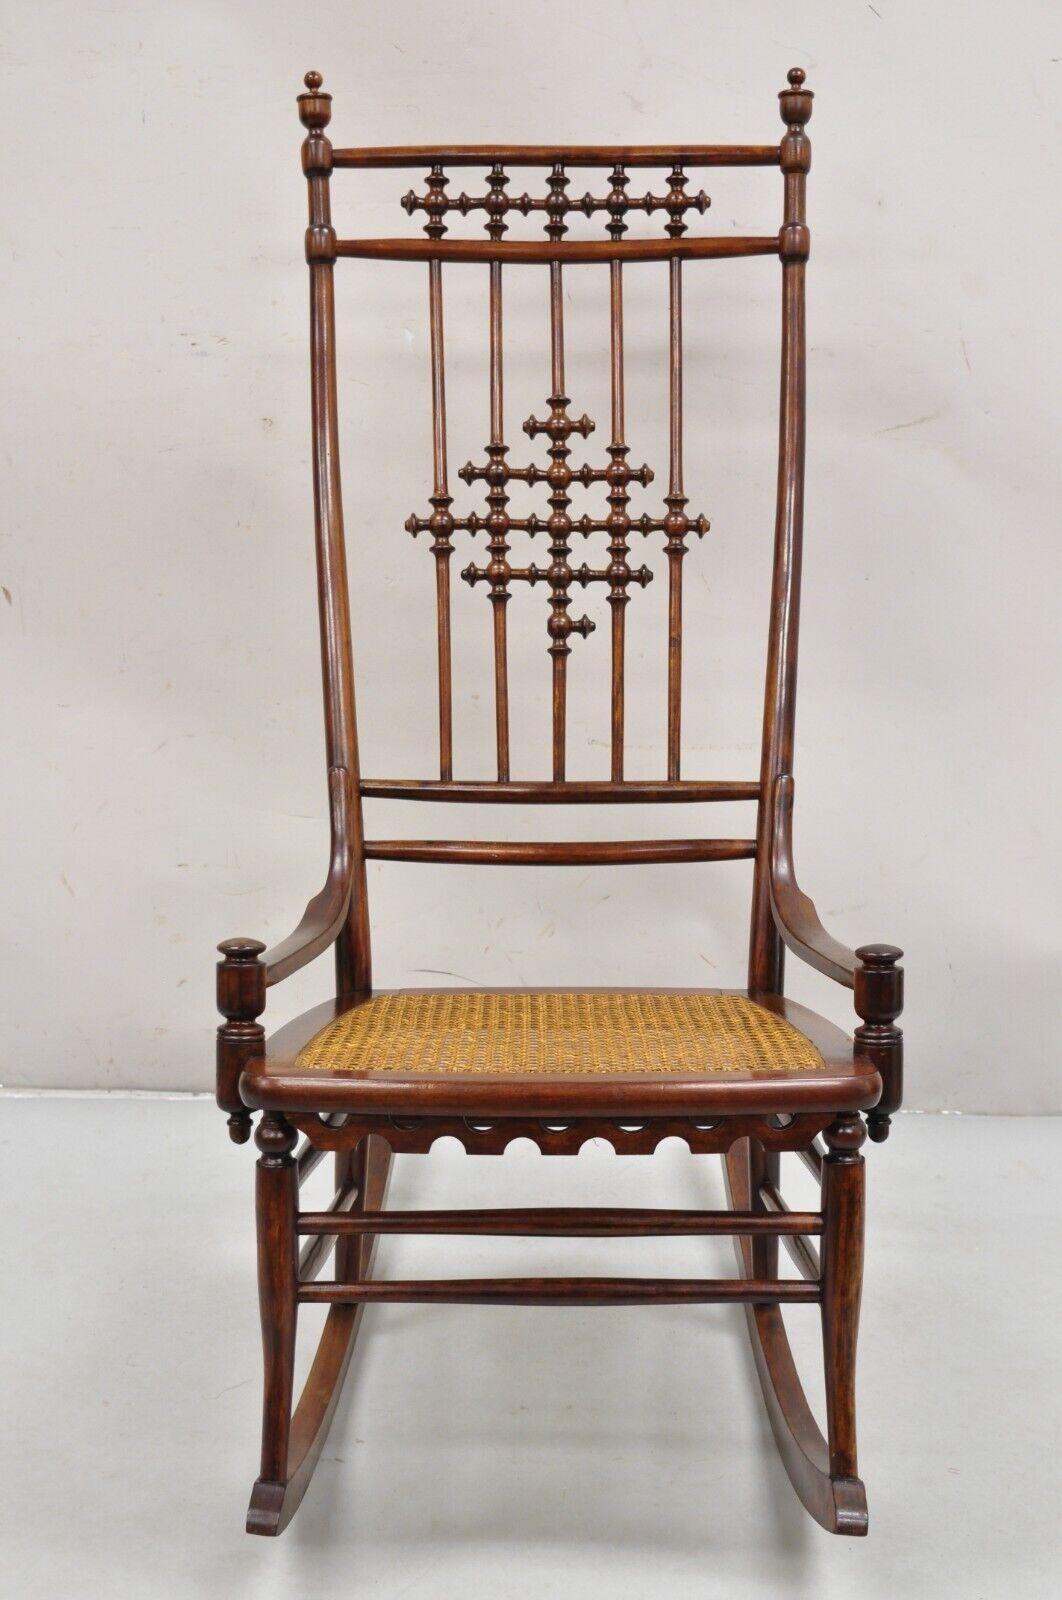 Victorian Aesthetic Movement Chestnut Stick & Ball Spindle Rocker Rocking Chair For Sale 4